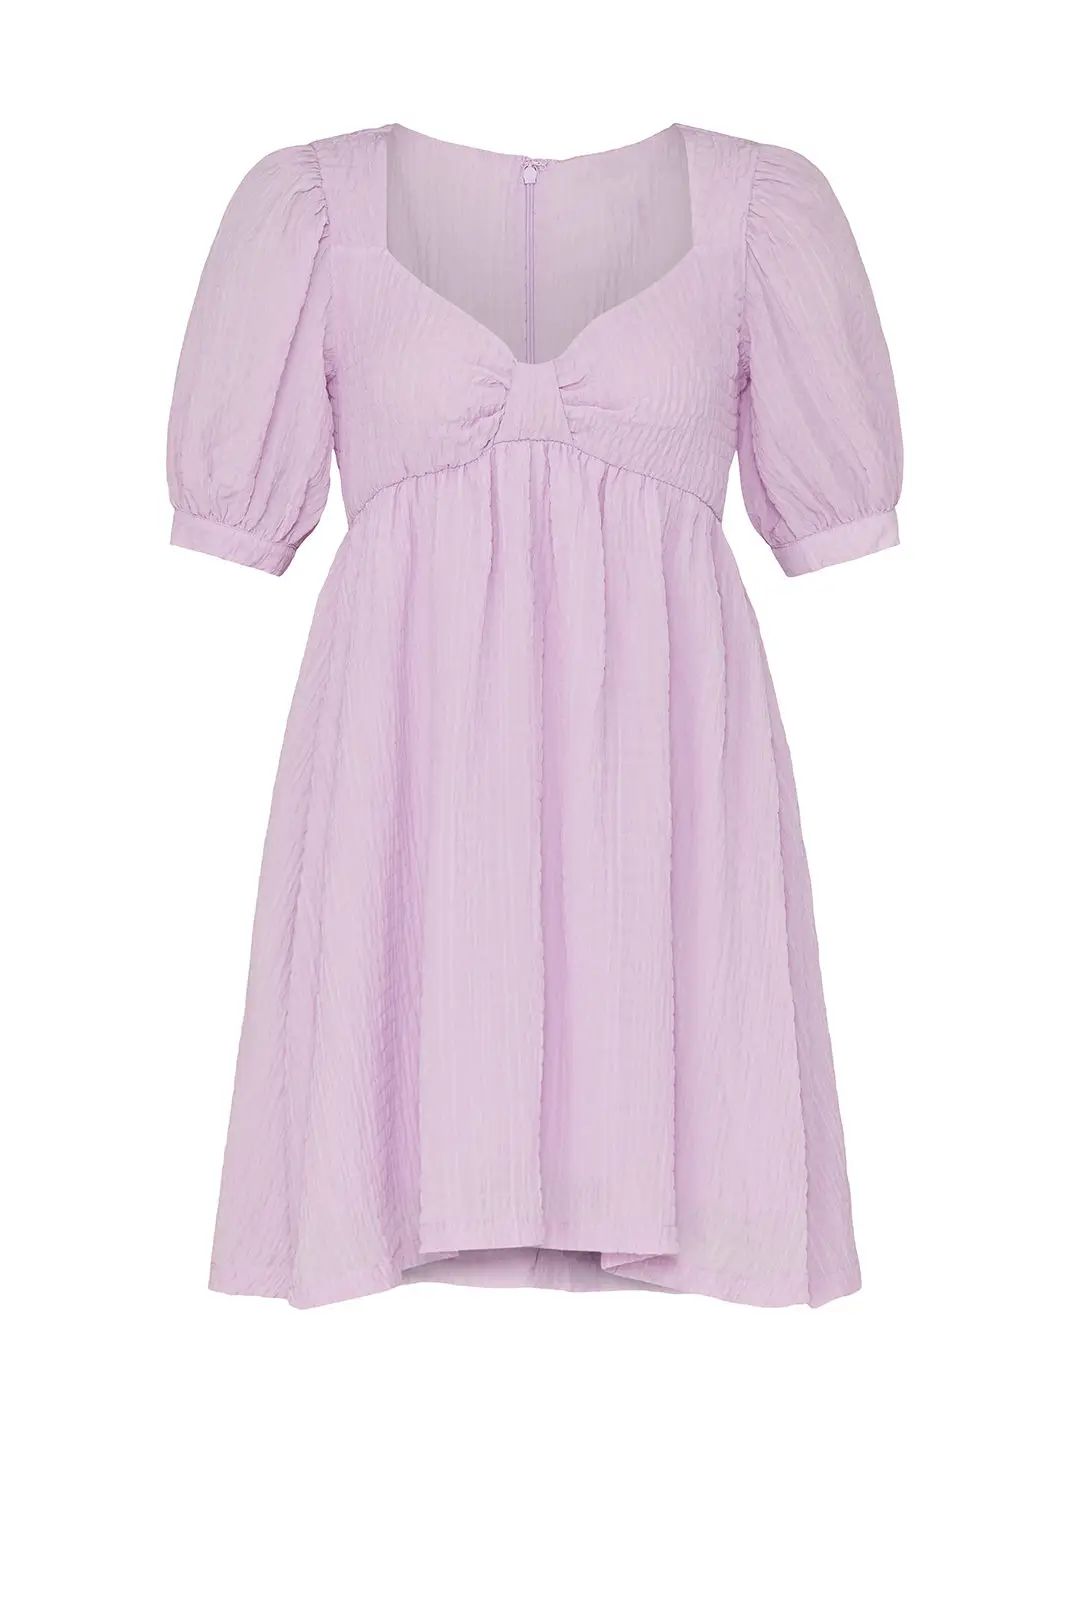 RTR NOW Lilac Babydoll Dress | Rent the Runway